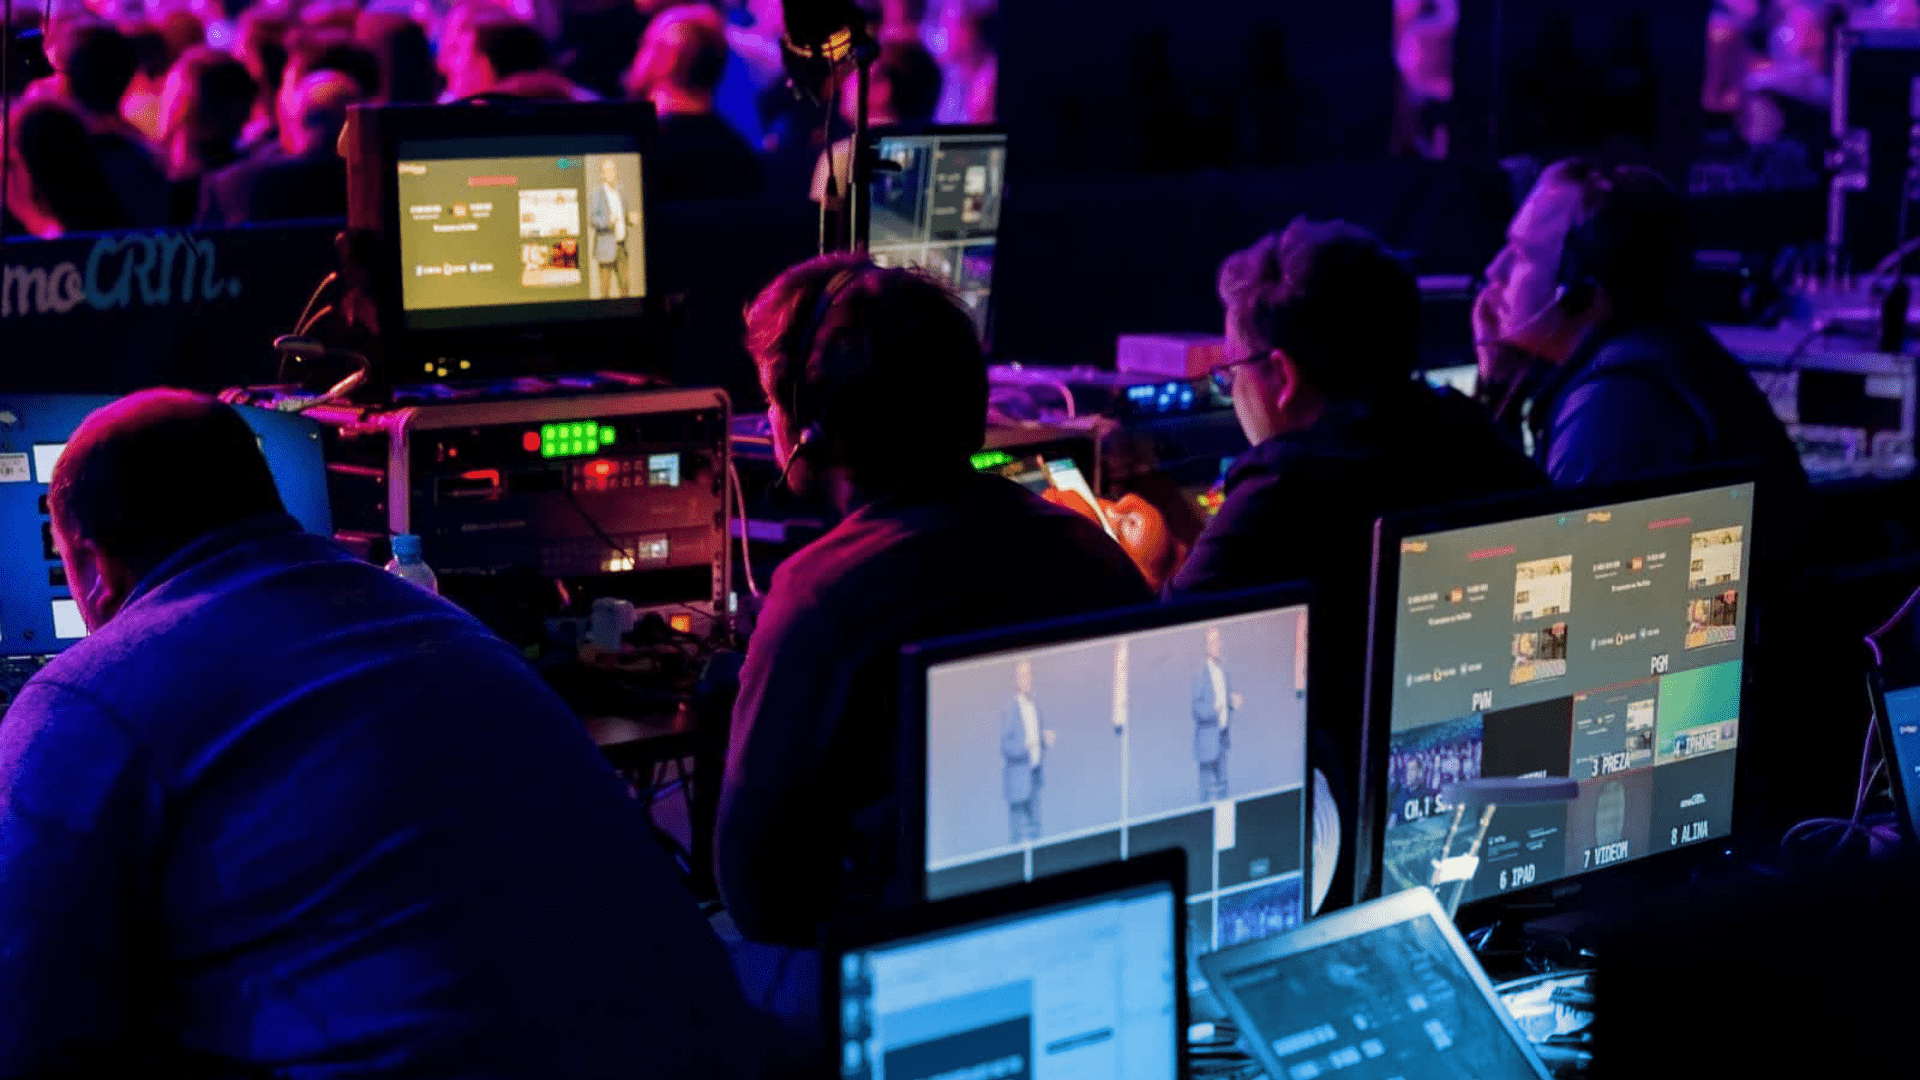 Event production team overseeing the technical aspects of a live event through their laptops and AV equipment